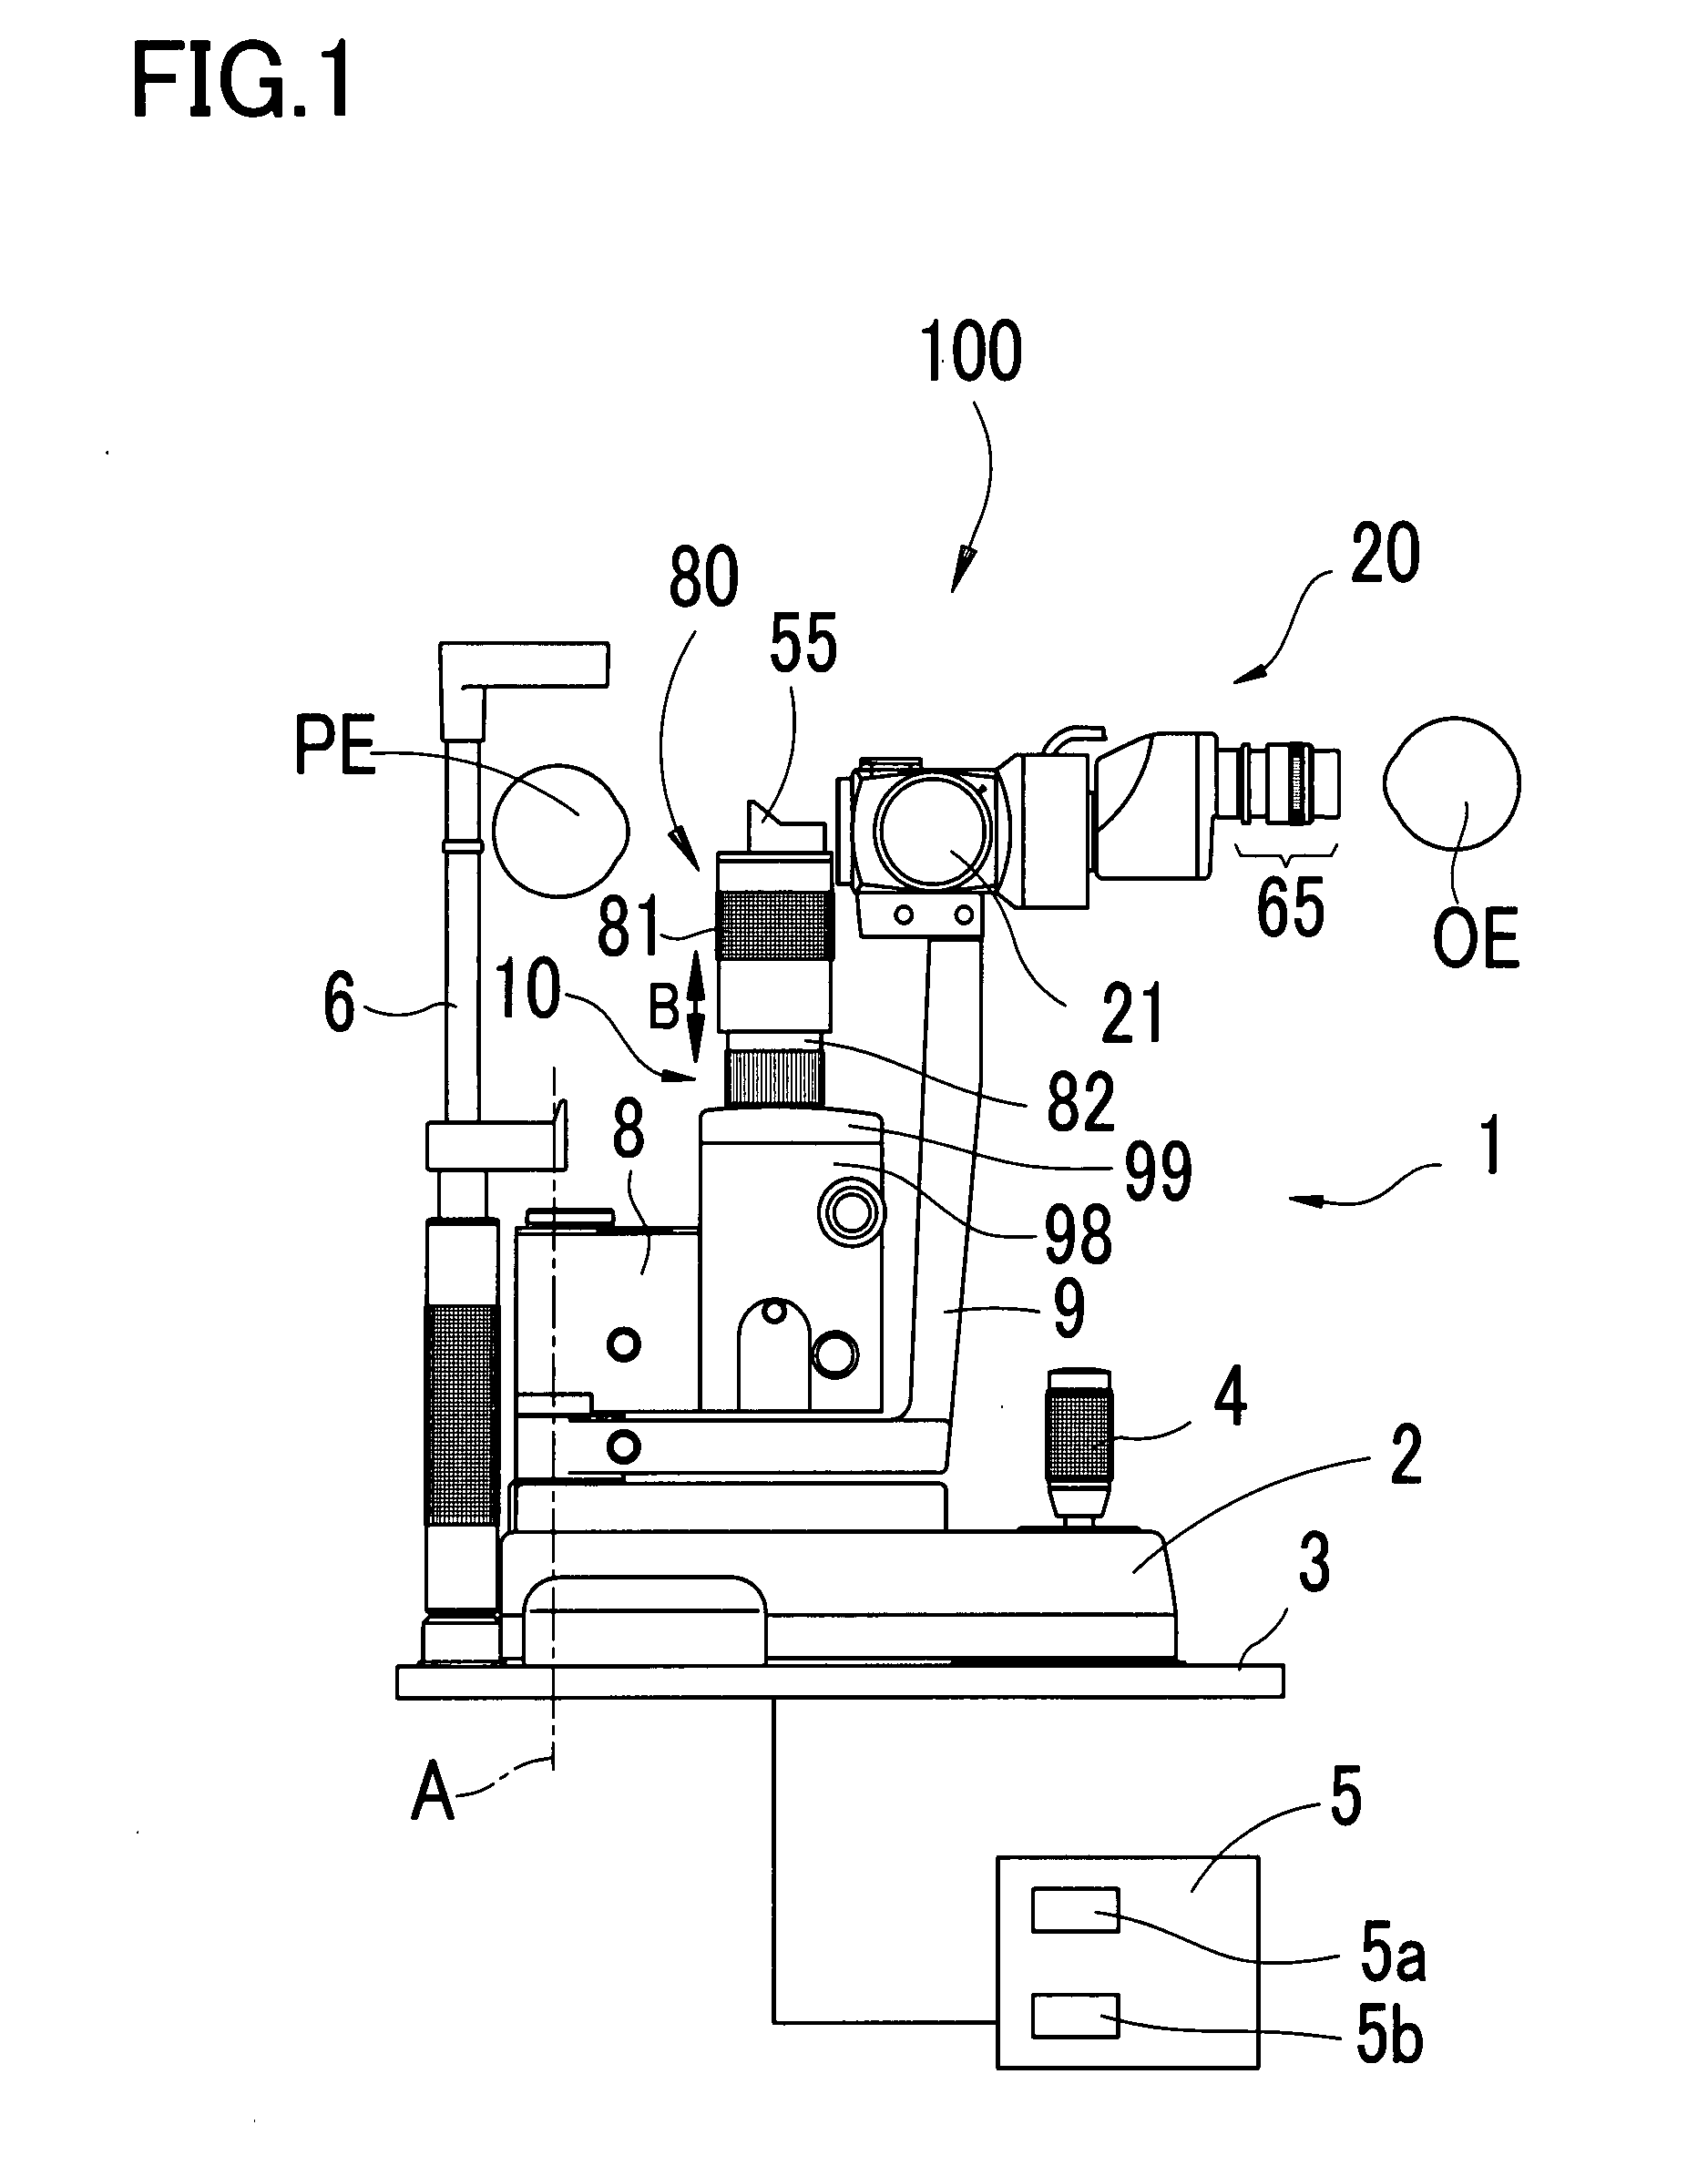 Slit lamp microscope and ophthalmic laser treatment apparatus with the microscope